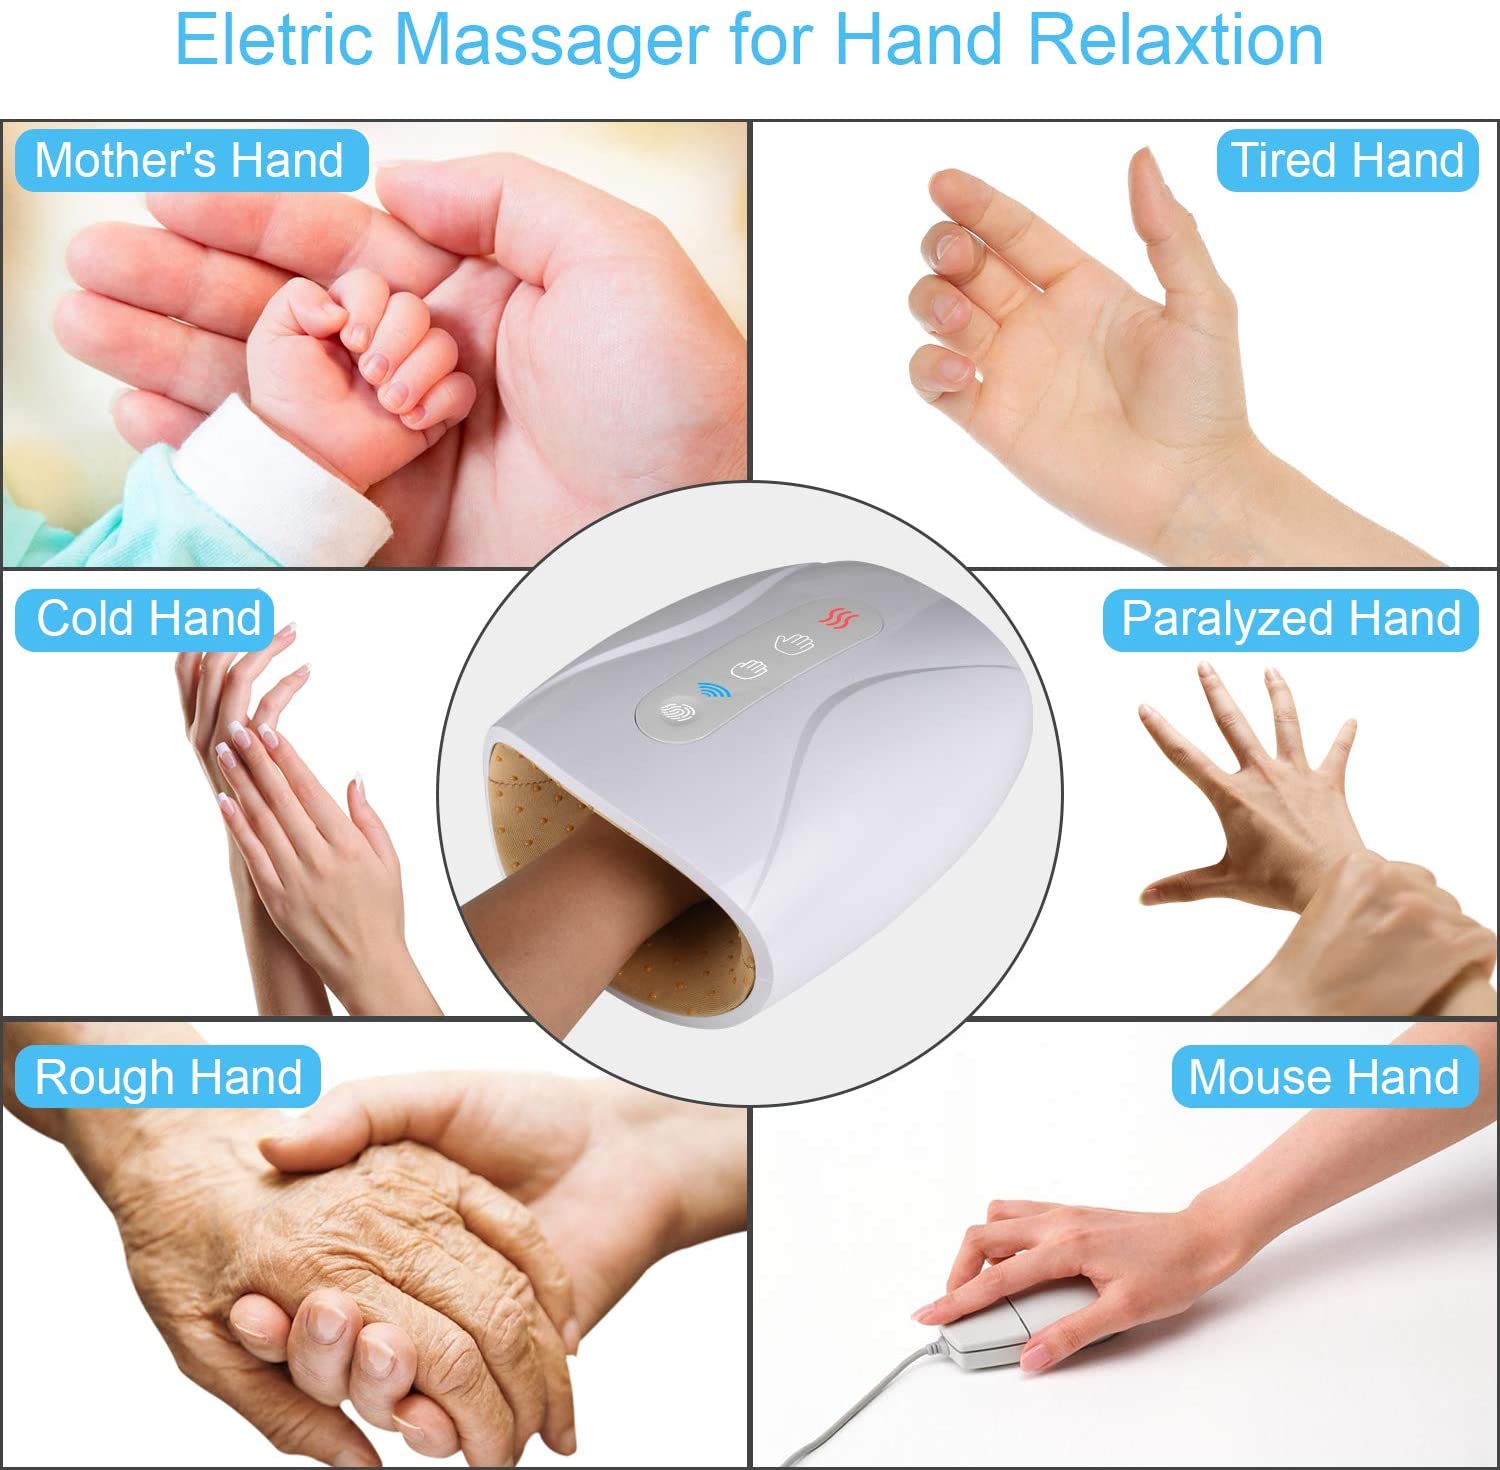 Cotsoco Electric Hand Massager for Palm Massage, Cordless Accupressure Massager with Air Pressure Compress/Heat/Rechargeable for Arthritis, Finger Numbness Coldness Relief